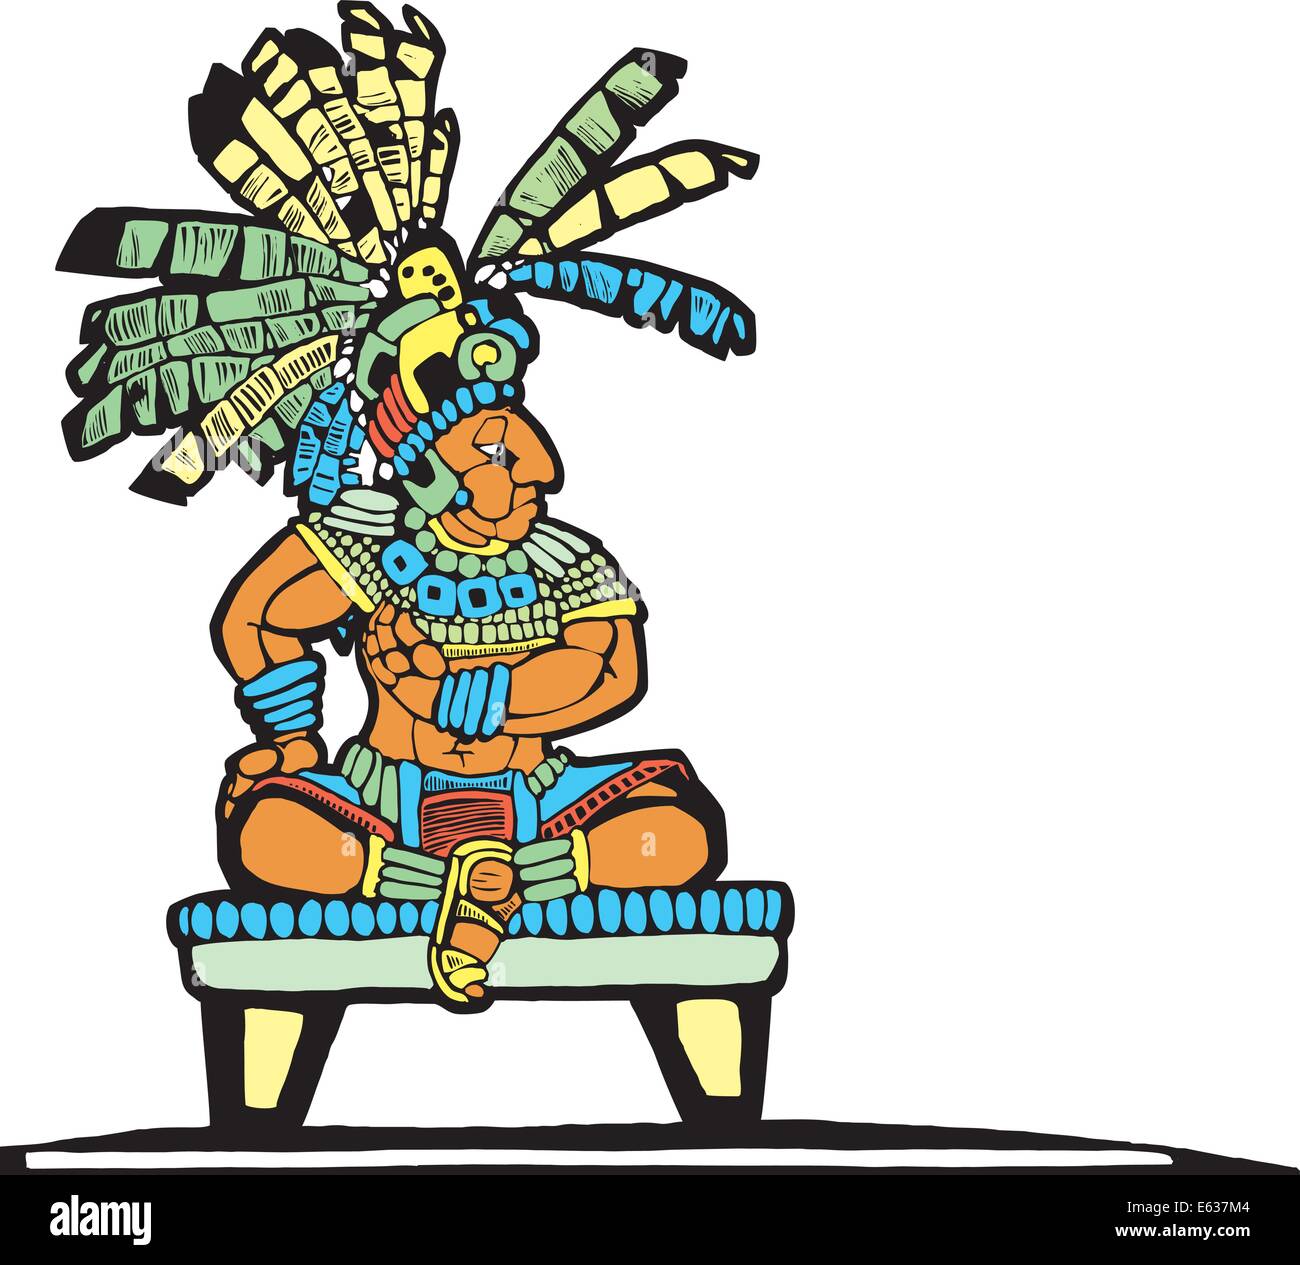 Mayan King designed after Mesoamerican Pottery and Temple Images. Stock Vector